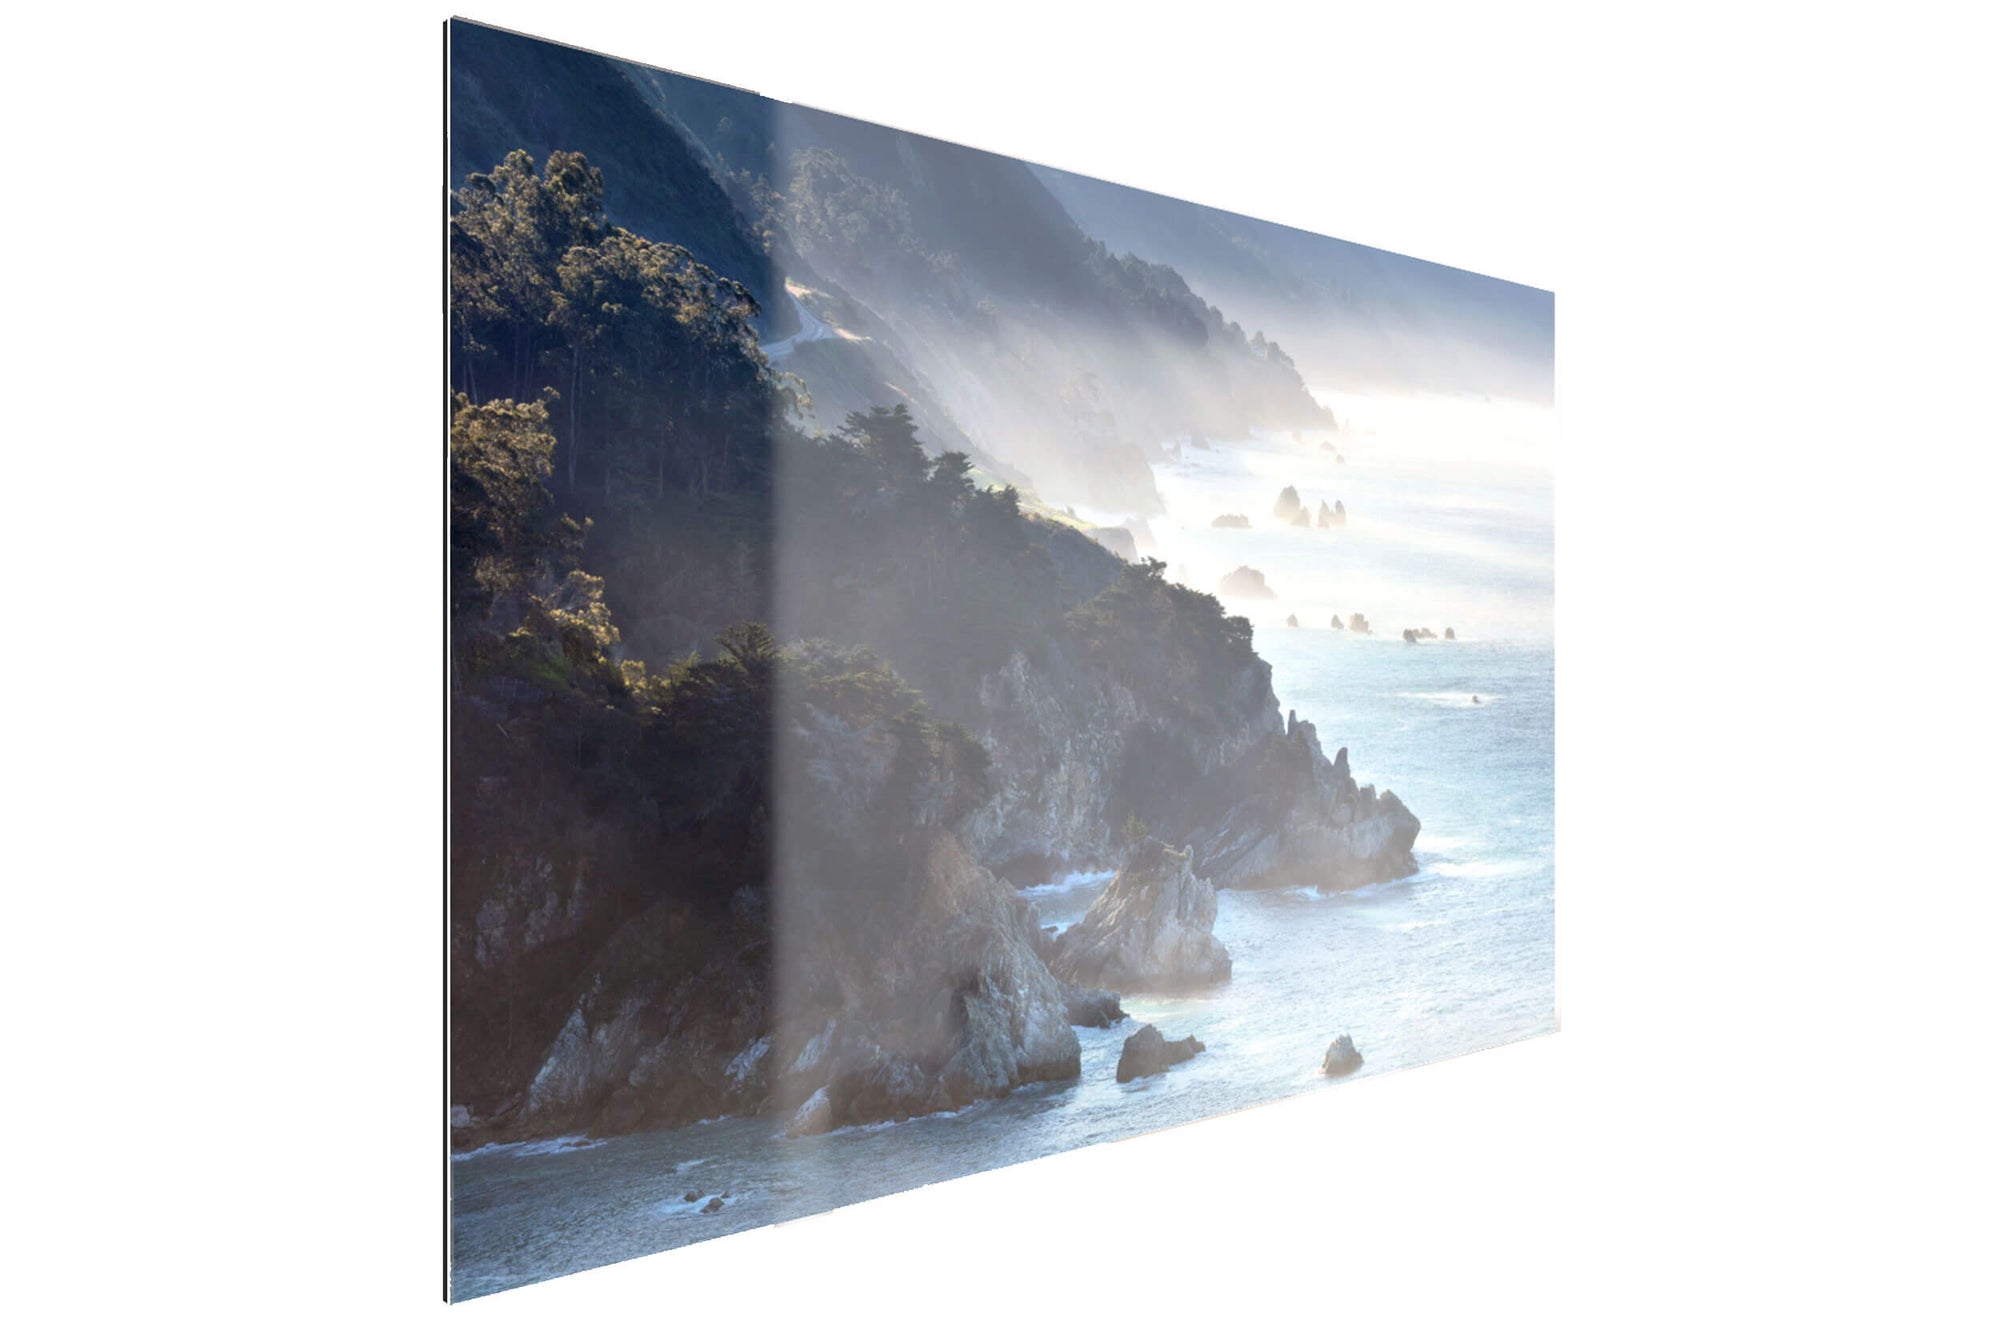 A TruLife acrylic Big Sur picture from California.